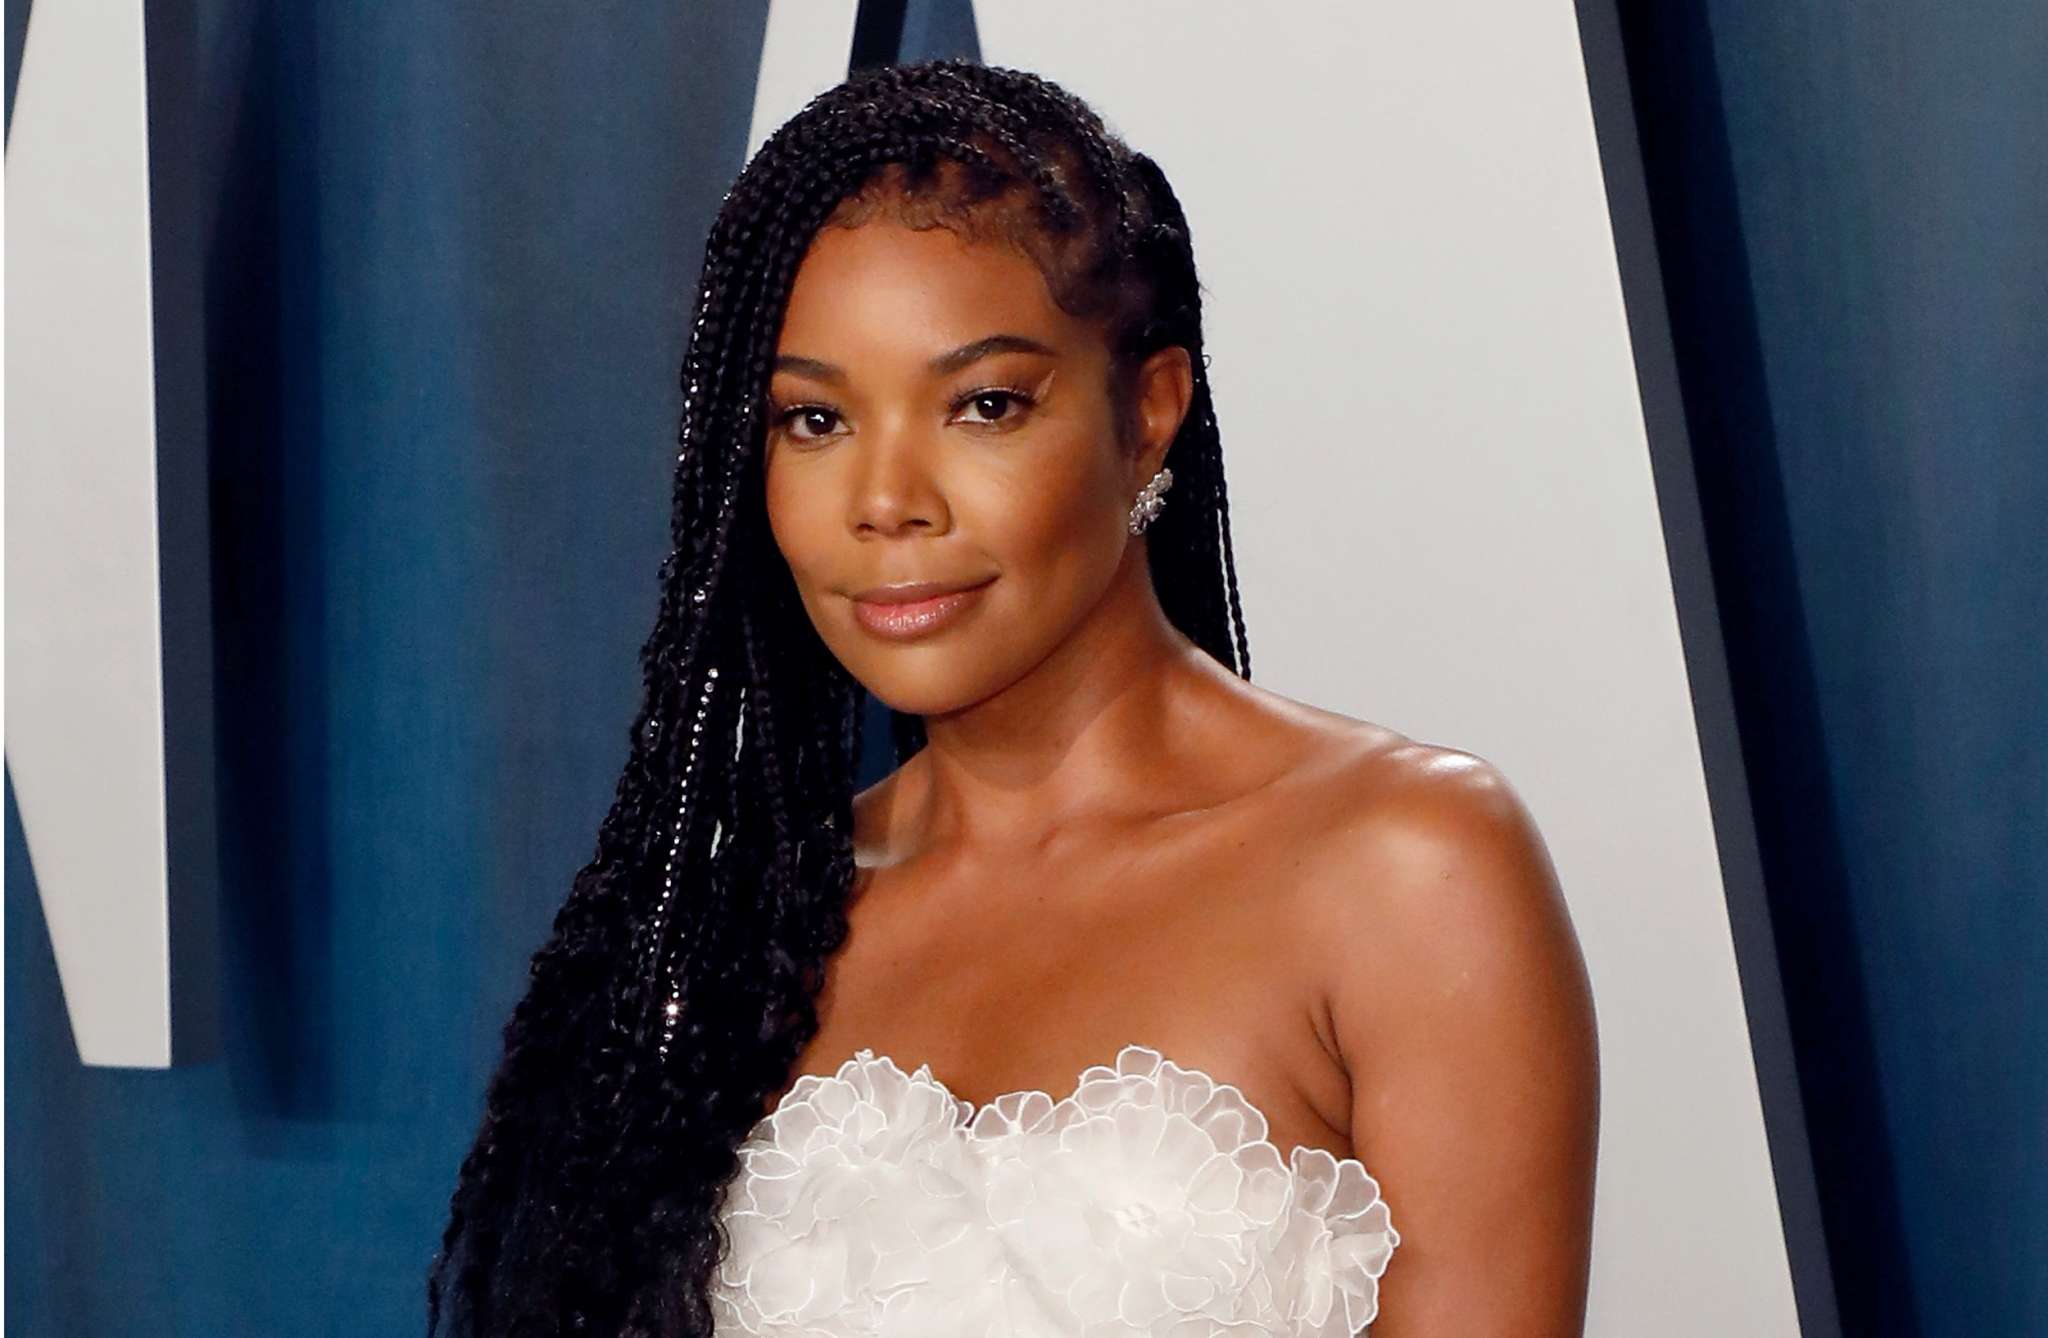 ”gabrielle-union-praises-a-model-filmmaker-and-actress-see-the-message-here”